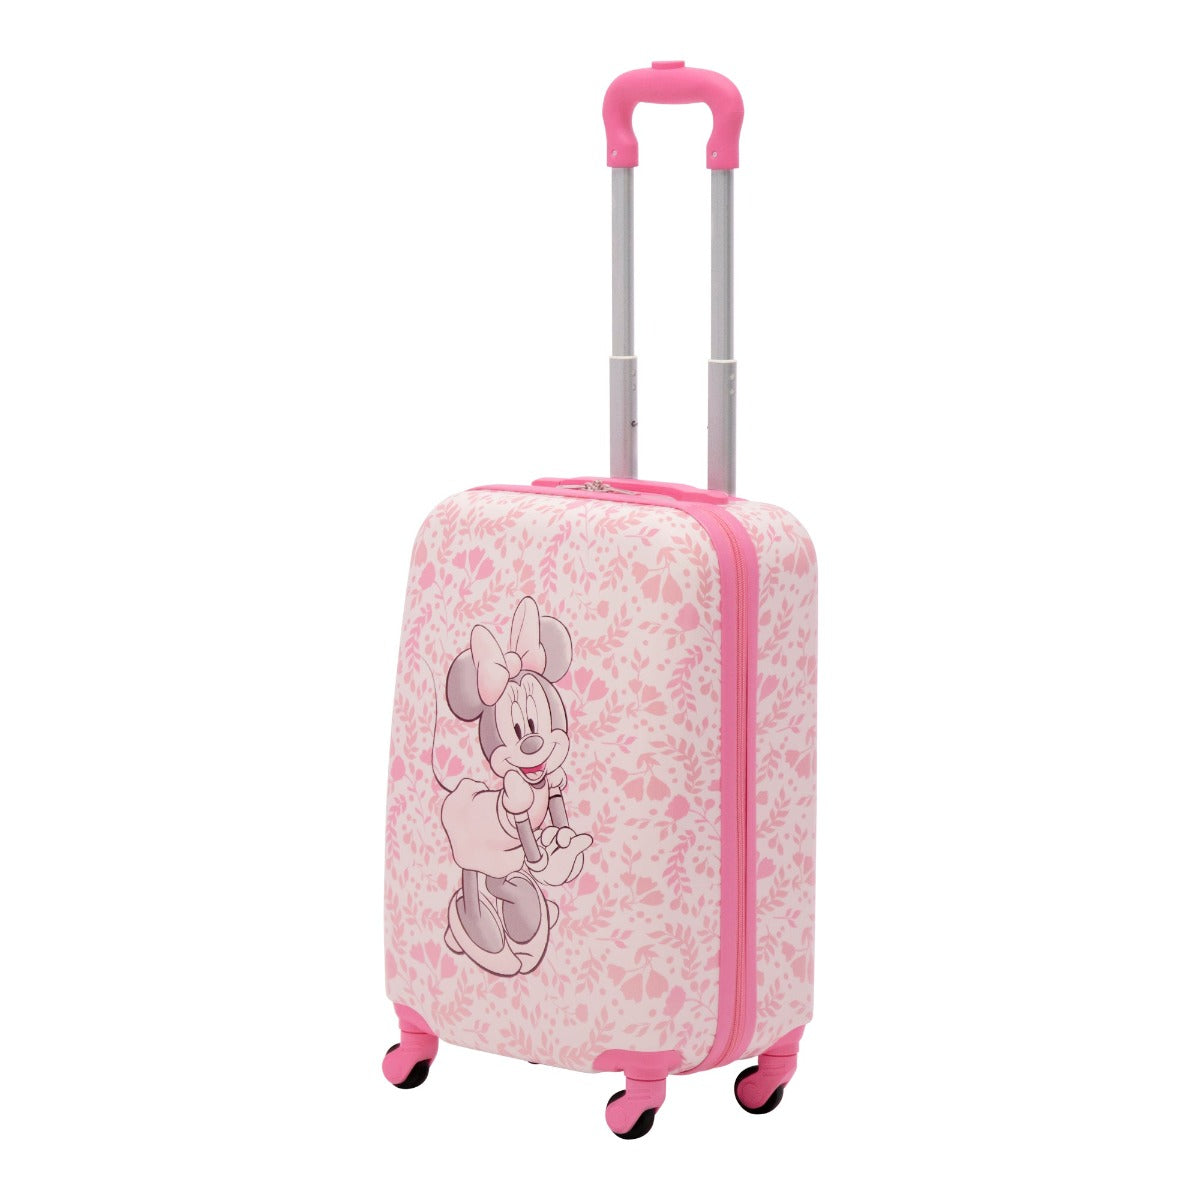 Disney Ful Minnie Mouse Floral Pink Hardside Spinner Suitcase - 20.5" Carry On Luggage for kids